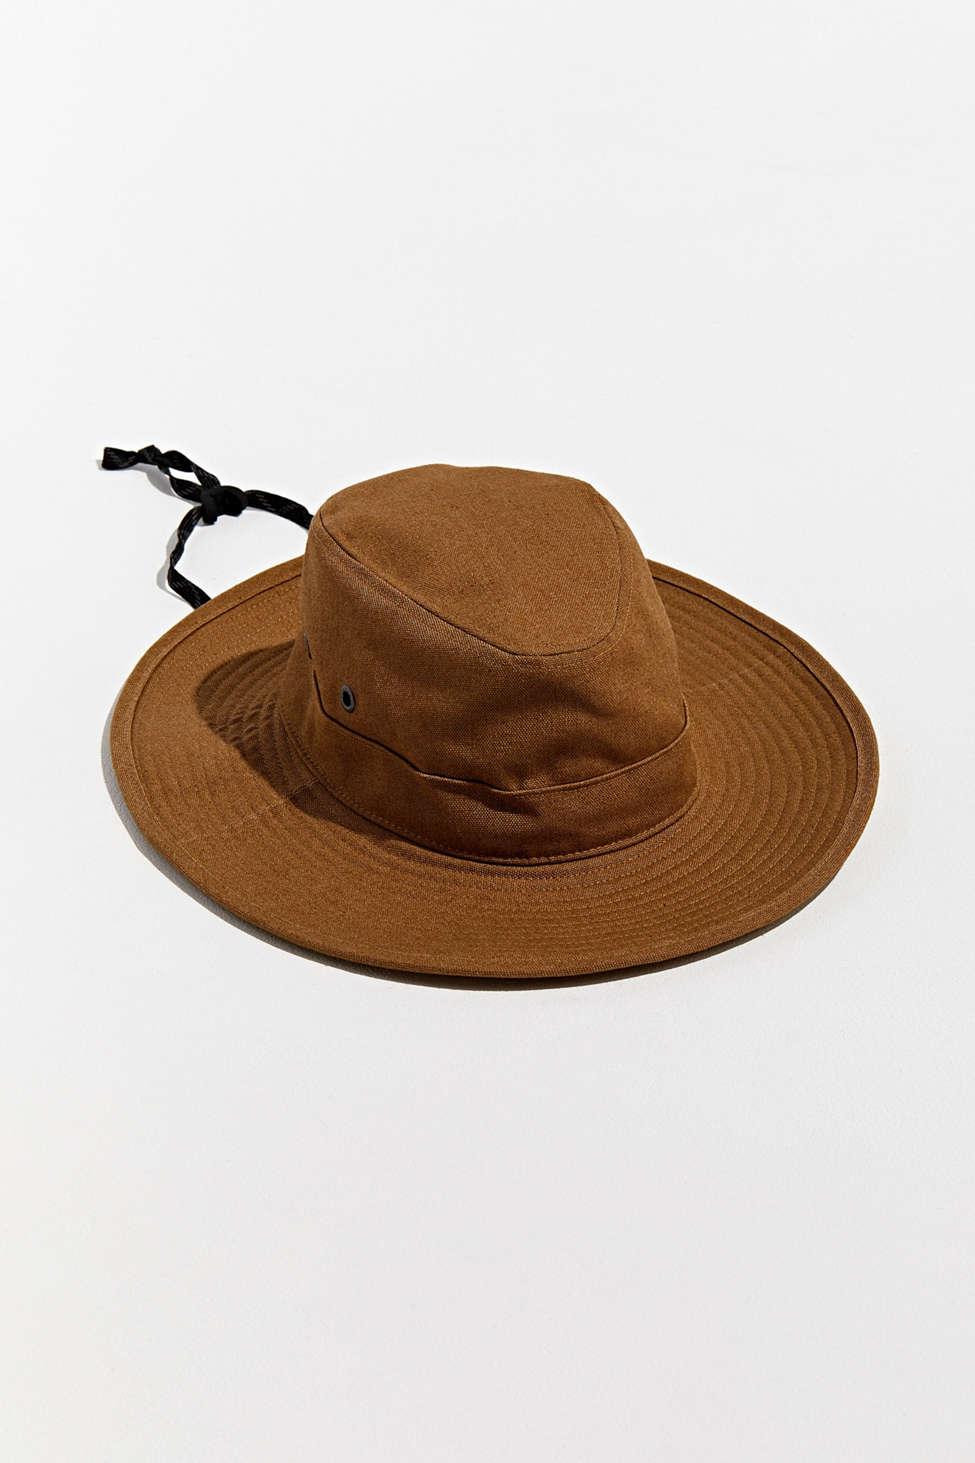 Patagonia Patagonia The Forge Bucket Hat in Brown for Men - Lyst